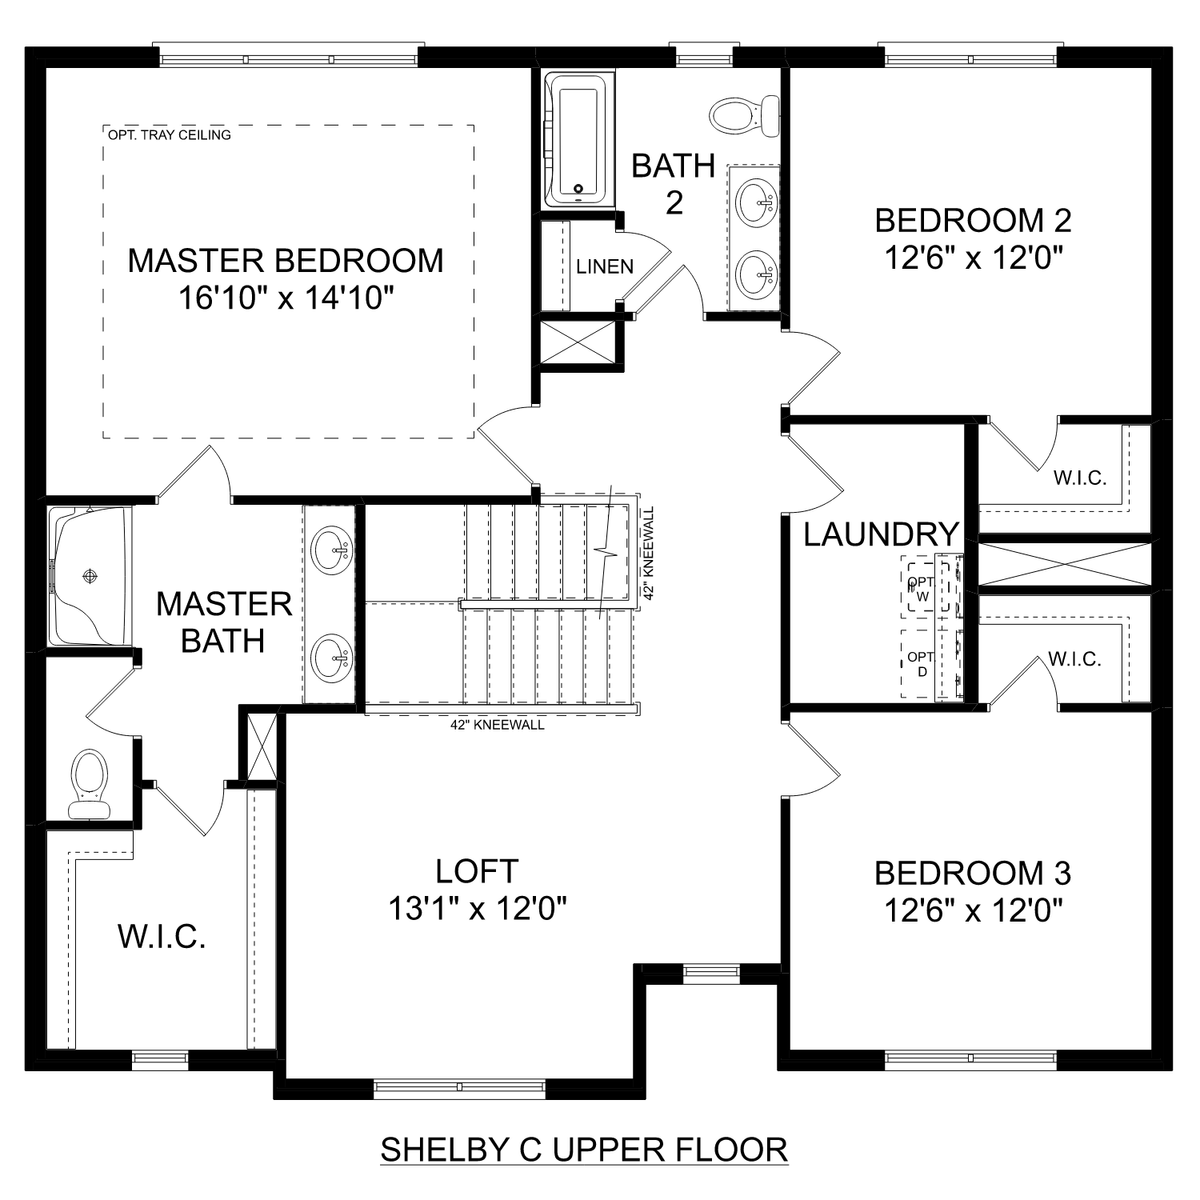 2 - The Shelby C - Side Entry floor plan layout for 314 Creek Grove Avenue in Davidson Homes' Creek Grove community.